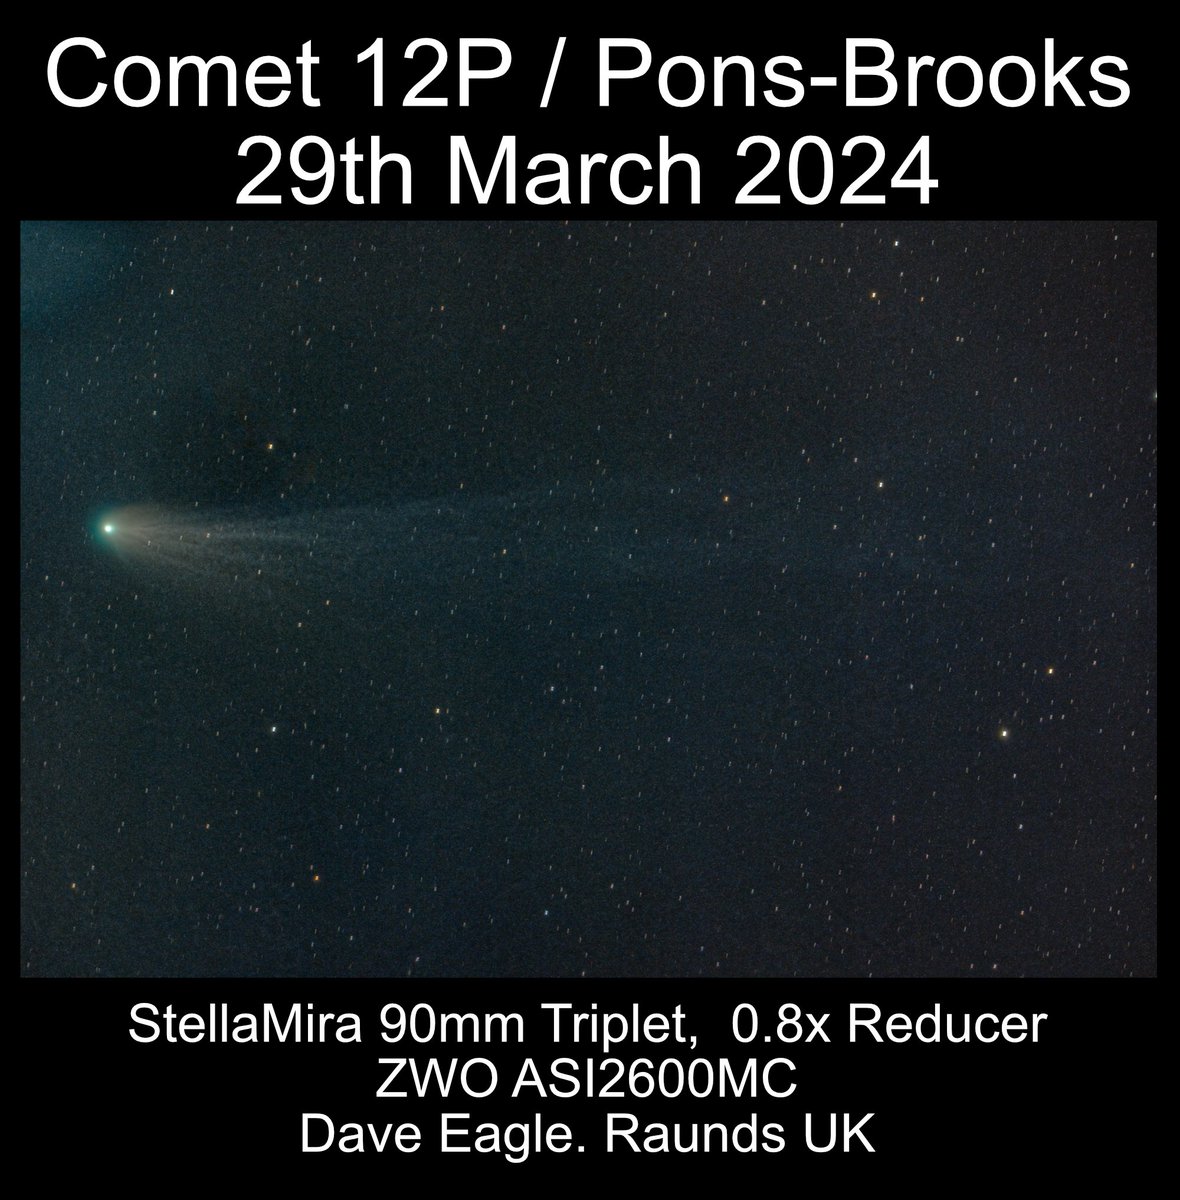 Fighting the neighbours trees, clouds, light pollution and a huge dust bunny (flats to be taken and added later) I managed to catch Comet 12P / Pons-Brooks before it went behind the neighbours roof. I might have to go mobile very soon. Easily visible in 10x40 bins.